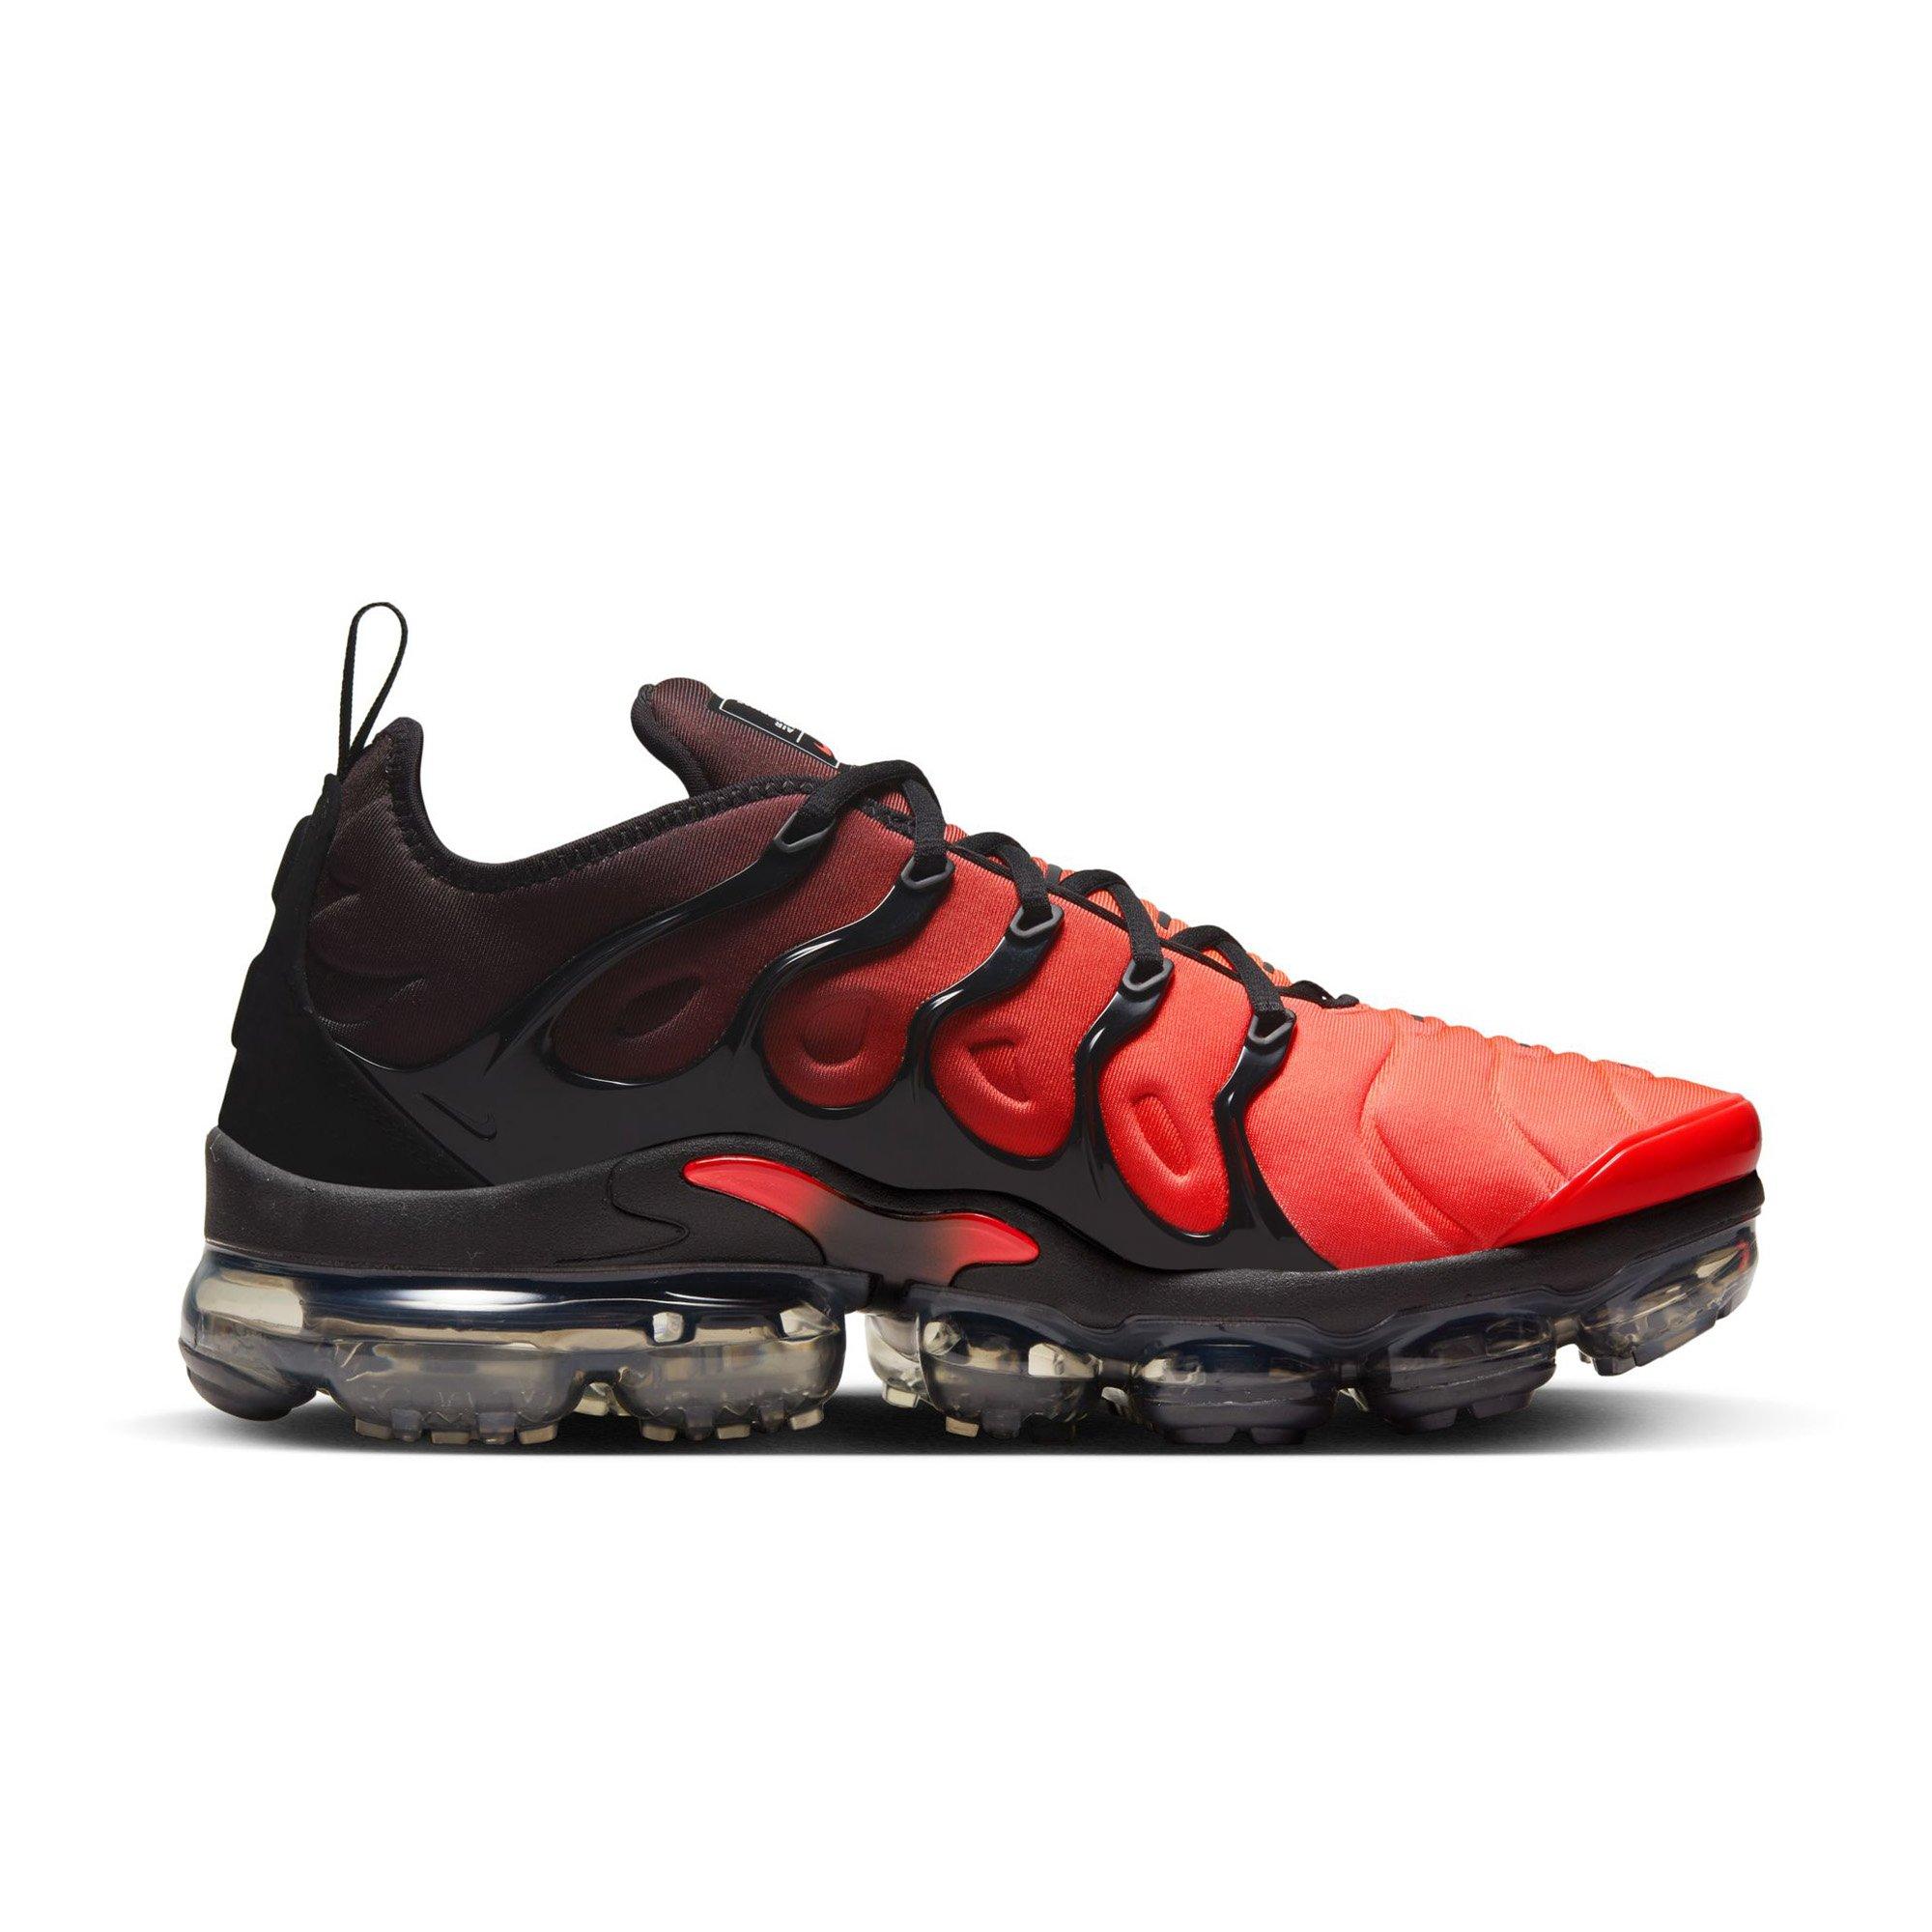 nike vapormax women's black and red